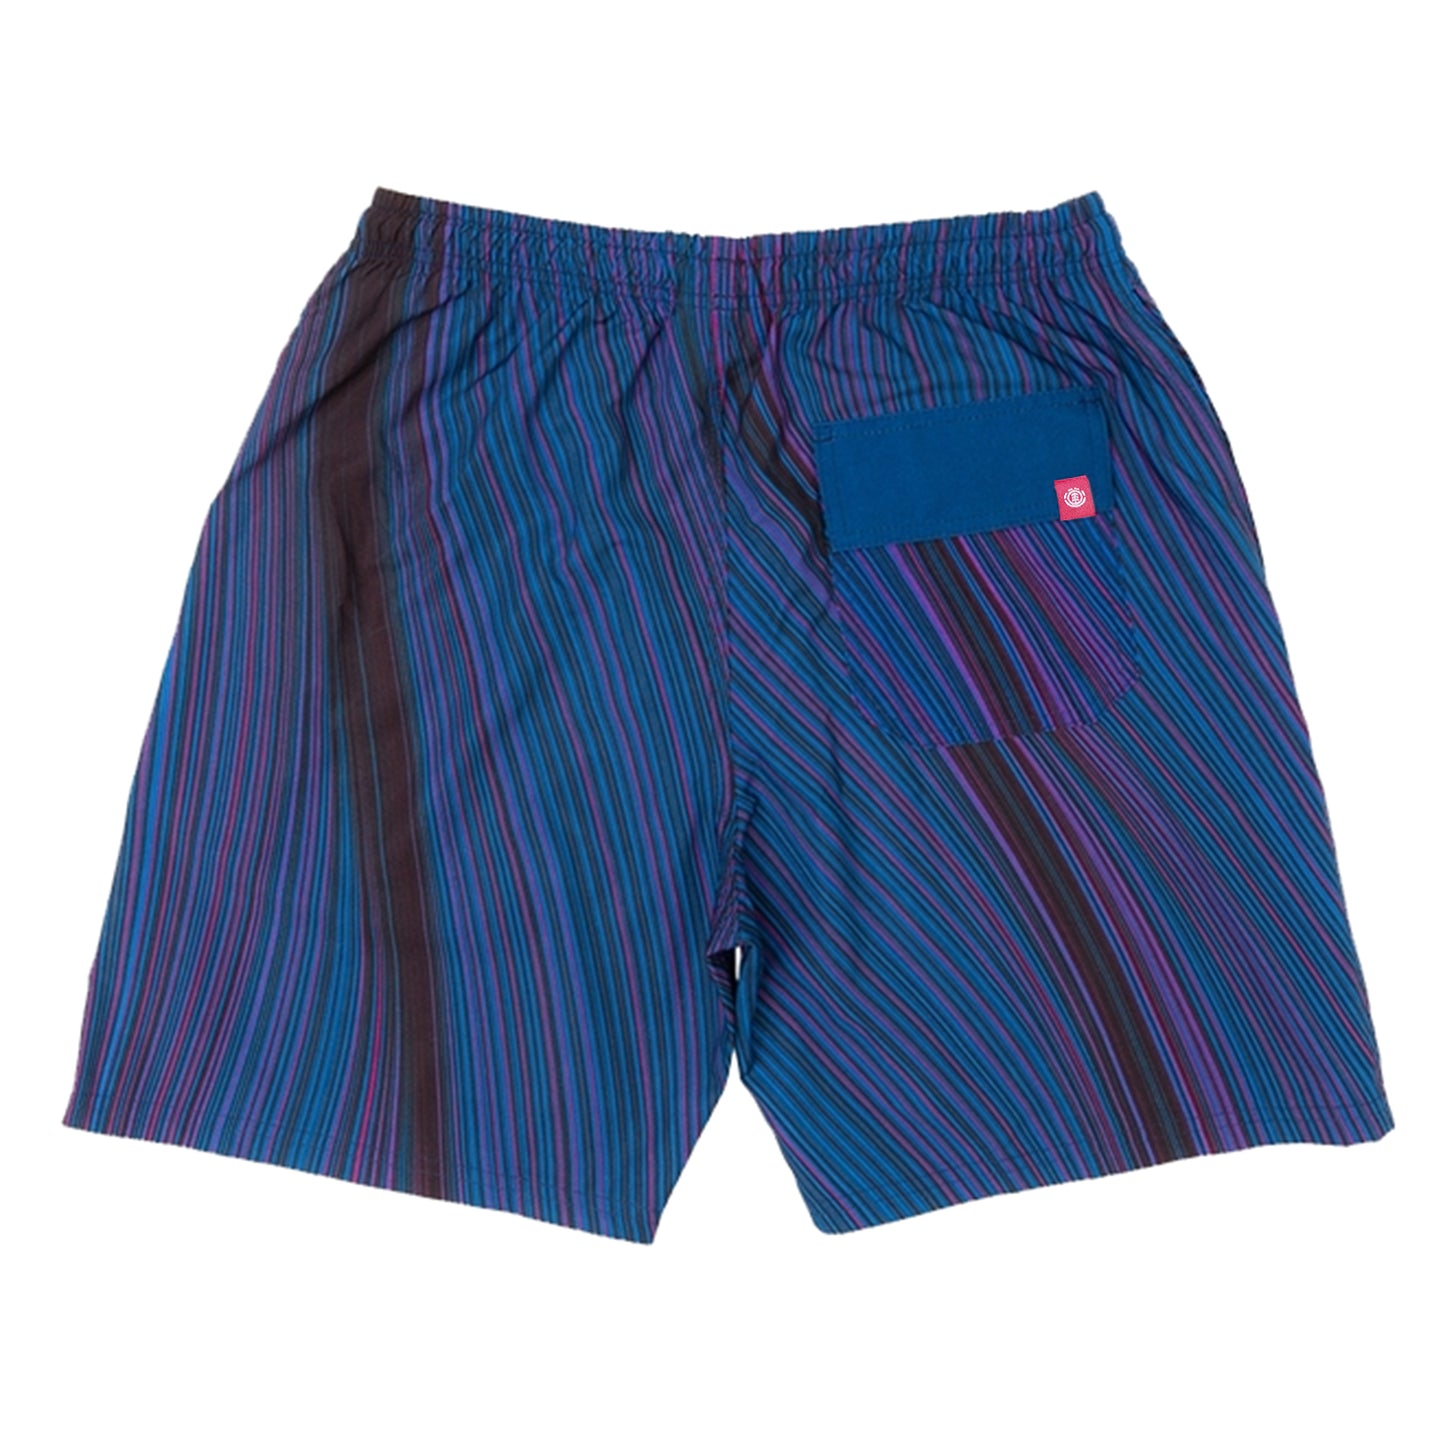 SHORTS ELEMENT TWISTED MULTI CORES